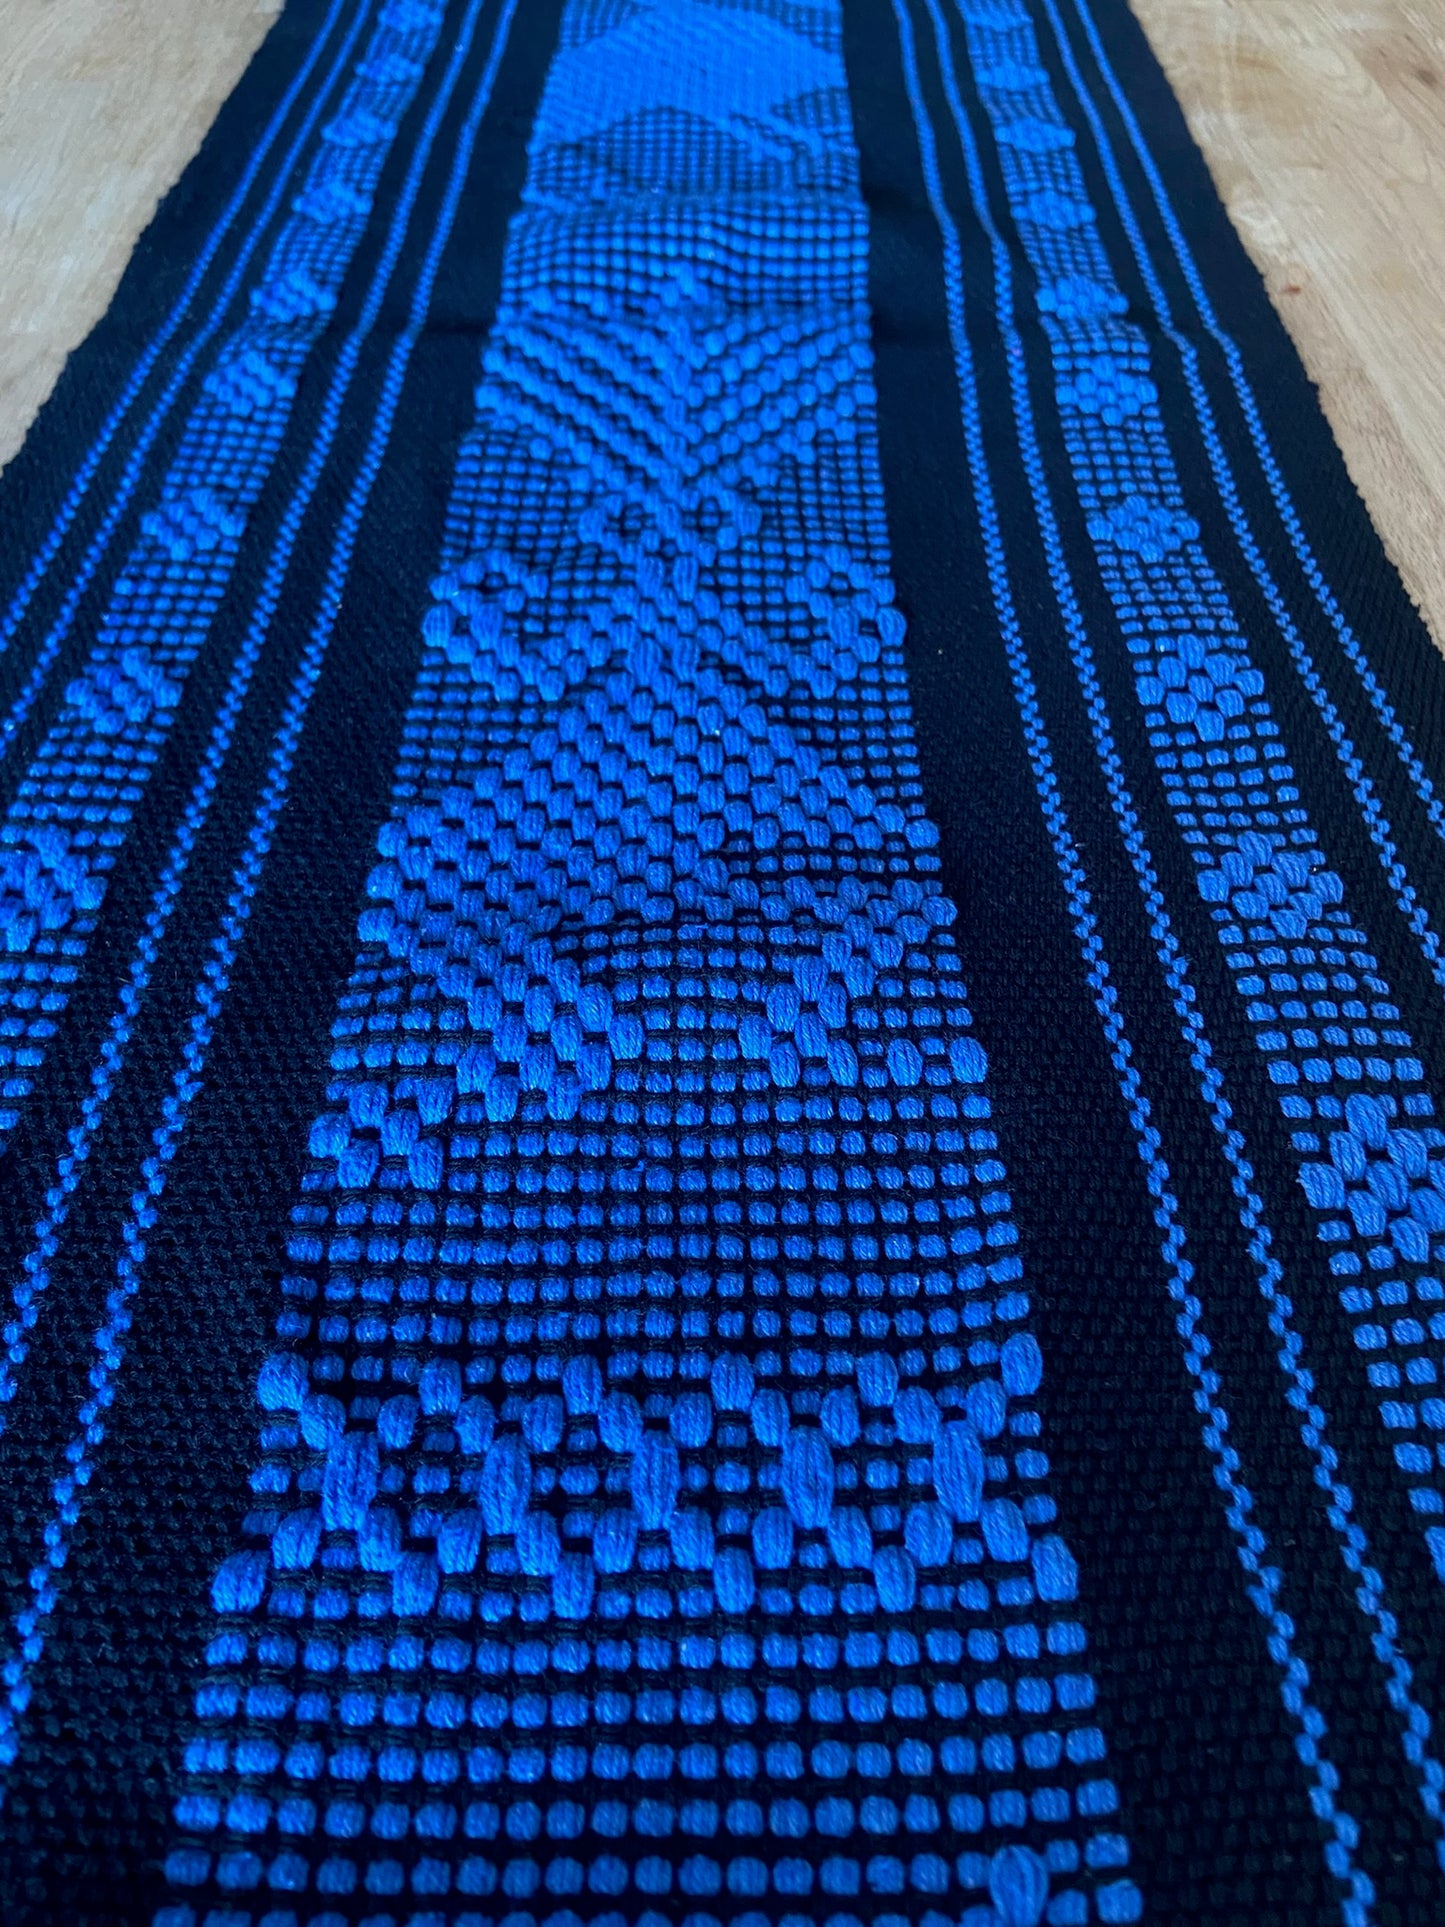 Set of hand woven table runner and 8 placemats in black and royal blue